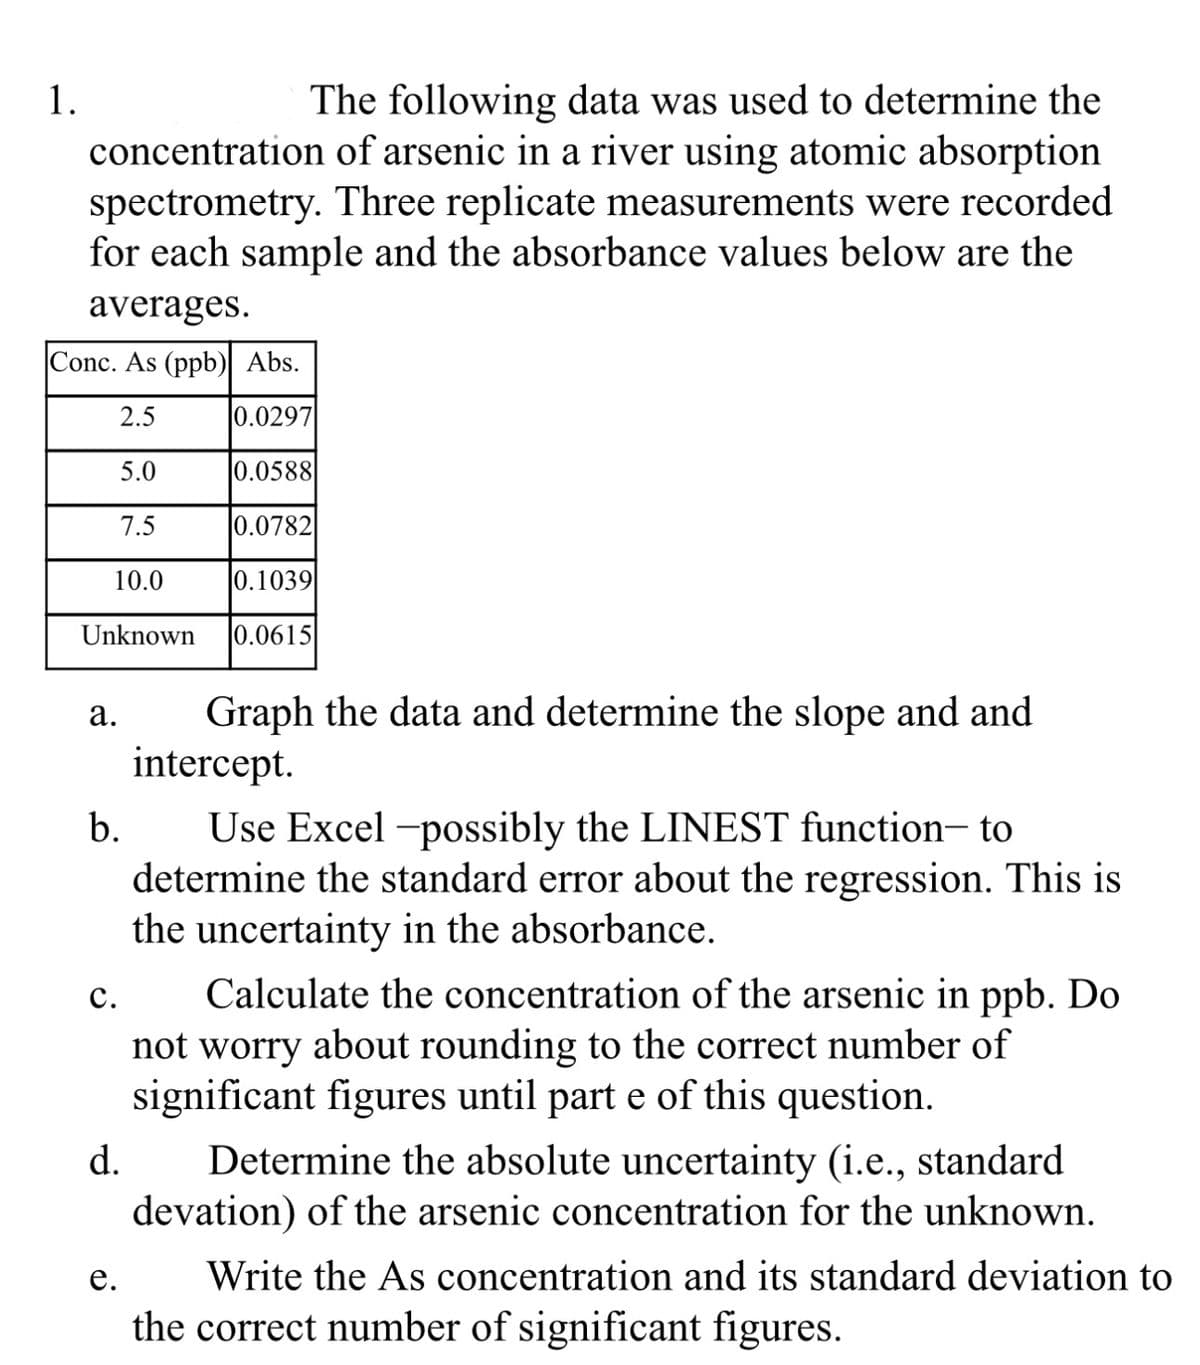 1.
The following data was used to determine the
concentration of arsenic in a river using atomic absorption
spectrometry. Three replicate measurements were recorded
for each sample and the absorbance values below are the
averages.
Conc. As (ppb) Abs.
2.5
0.0297
5.0
0.0588
7.5
0.0782
10.0
0.1039
Unknown 0.0615
a. Graph the data and determine the slope and and
intercept.
Use Excel-possibly the LINEST function- to
determine the standard error about the regression. This is
the uncertainty in the absorbance.
b.
C.
d.
e.
Calculate the concentration of the arsenic in ppb. Do
not worry about rounding to the correct number of
significant figures until part e of this question.
Determine the absolute uncertainty (i.e., standard
devation) of the arsenic concentration for the unknown.
Write the As concentration and its standard deviation to
the correct number of significant figures.